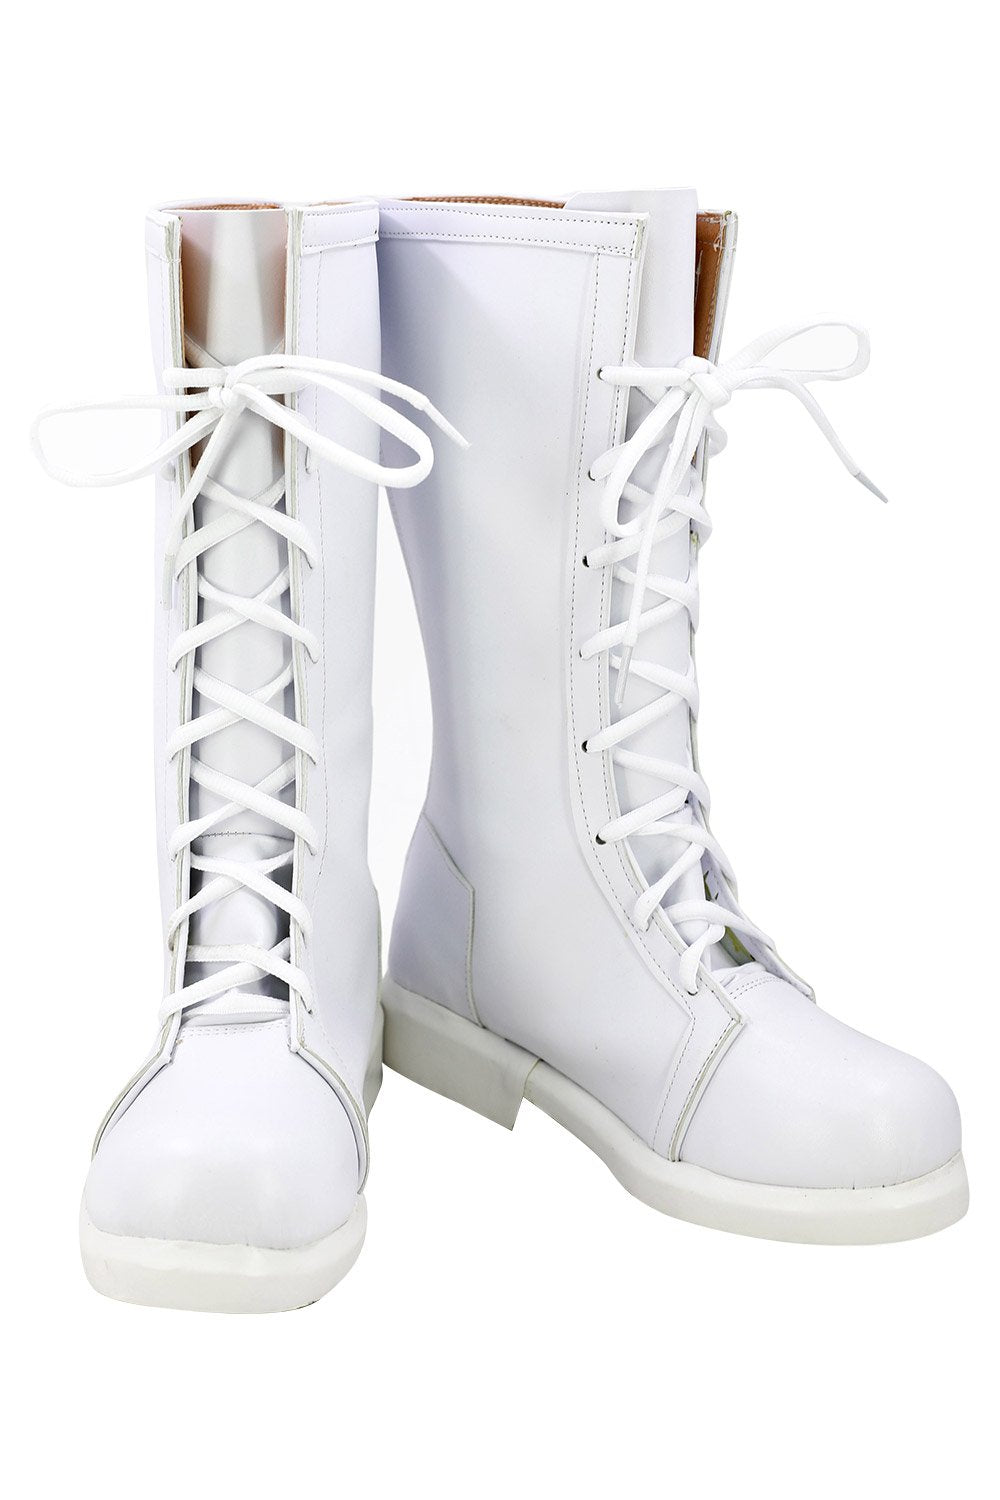 Cells at Work! Neutrophil Bottes Cosplay Chaussures